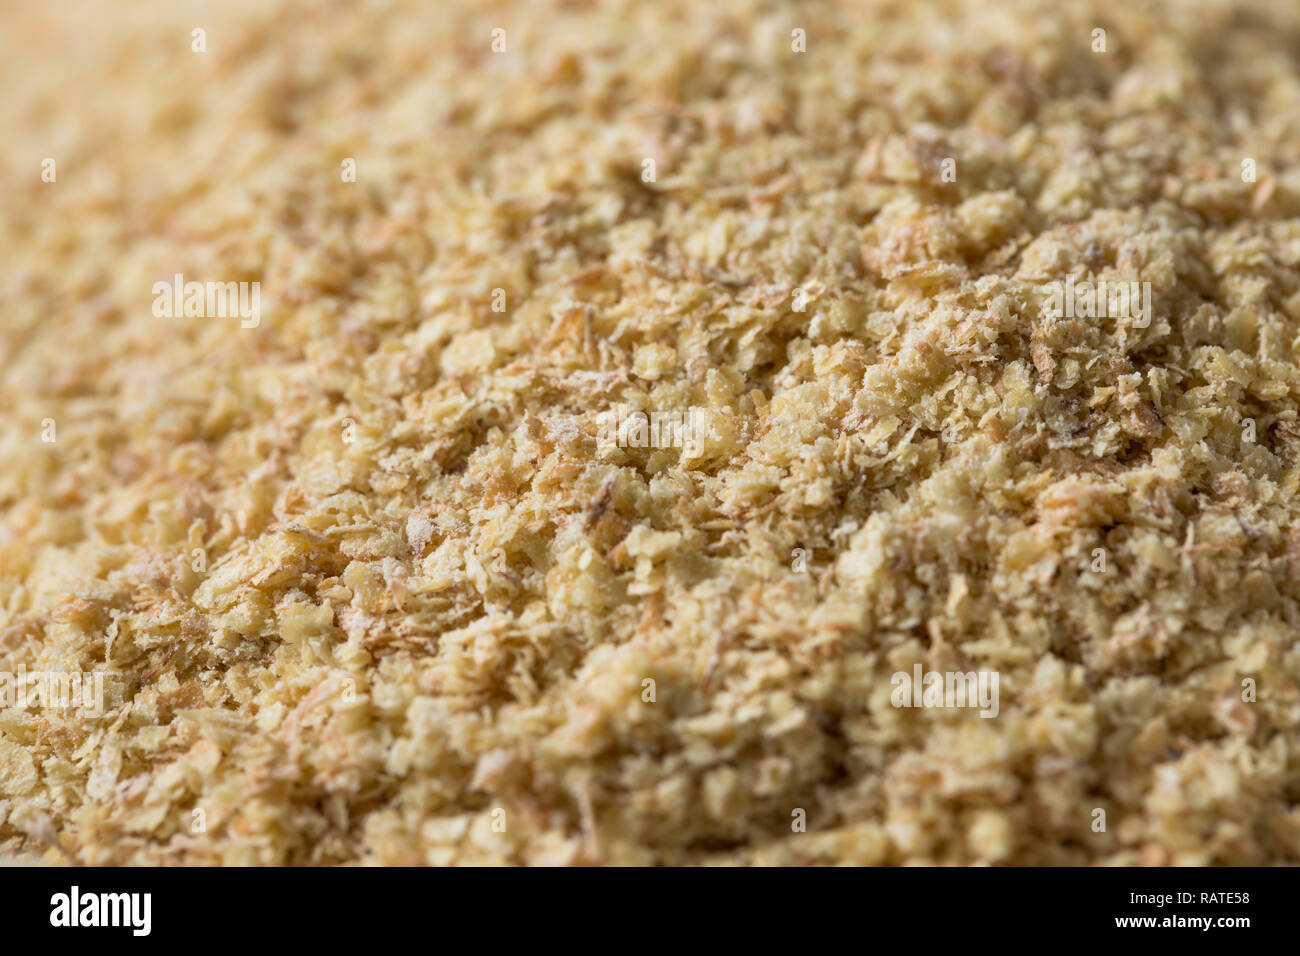 Dry Organic Wheat Germ Flour Ready to Cook With Stock Photo